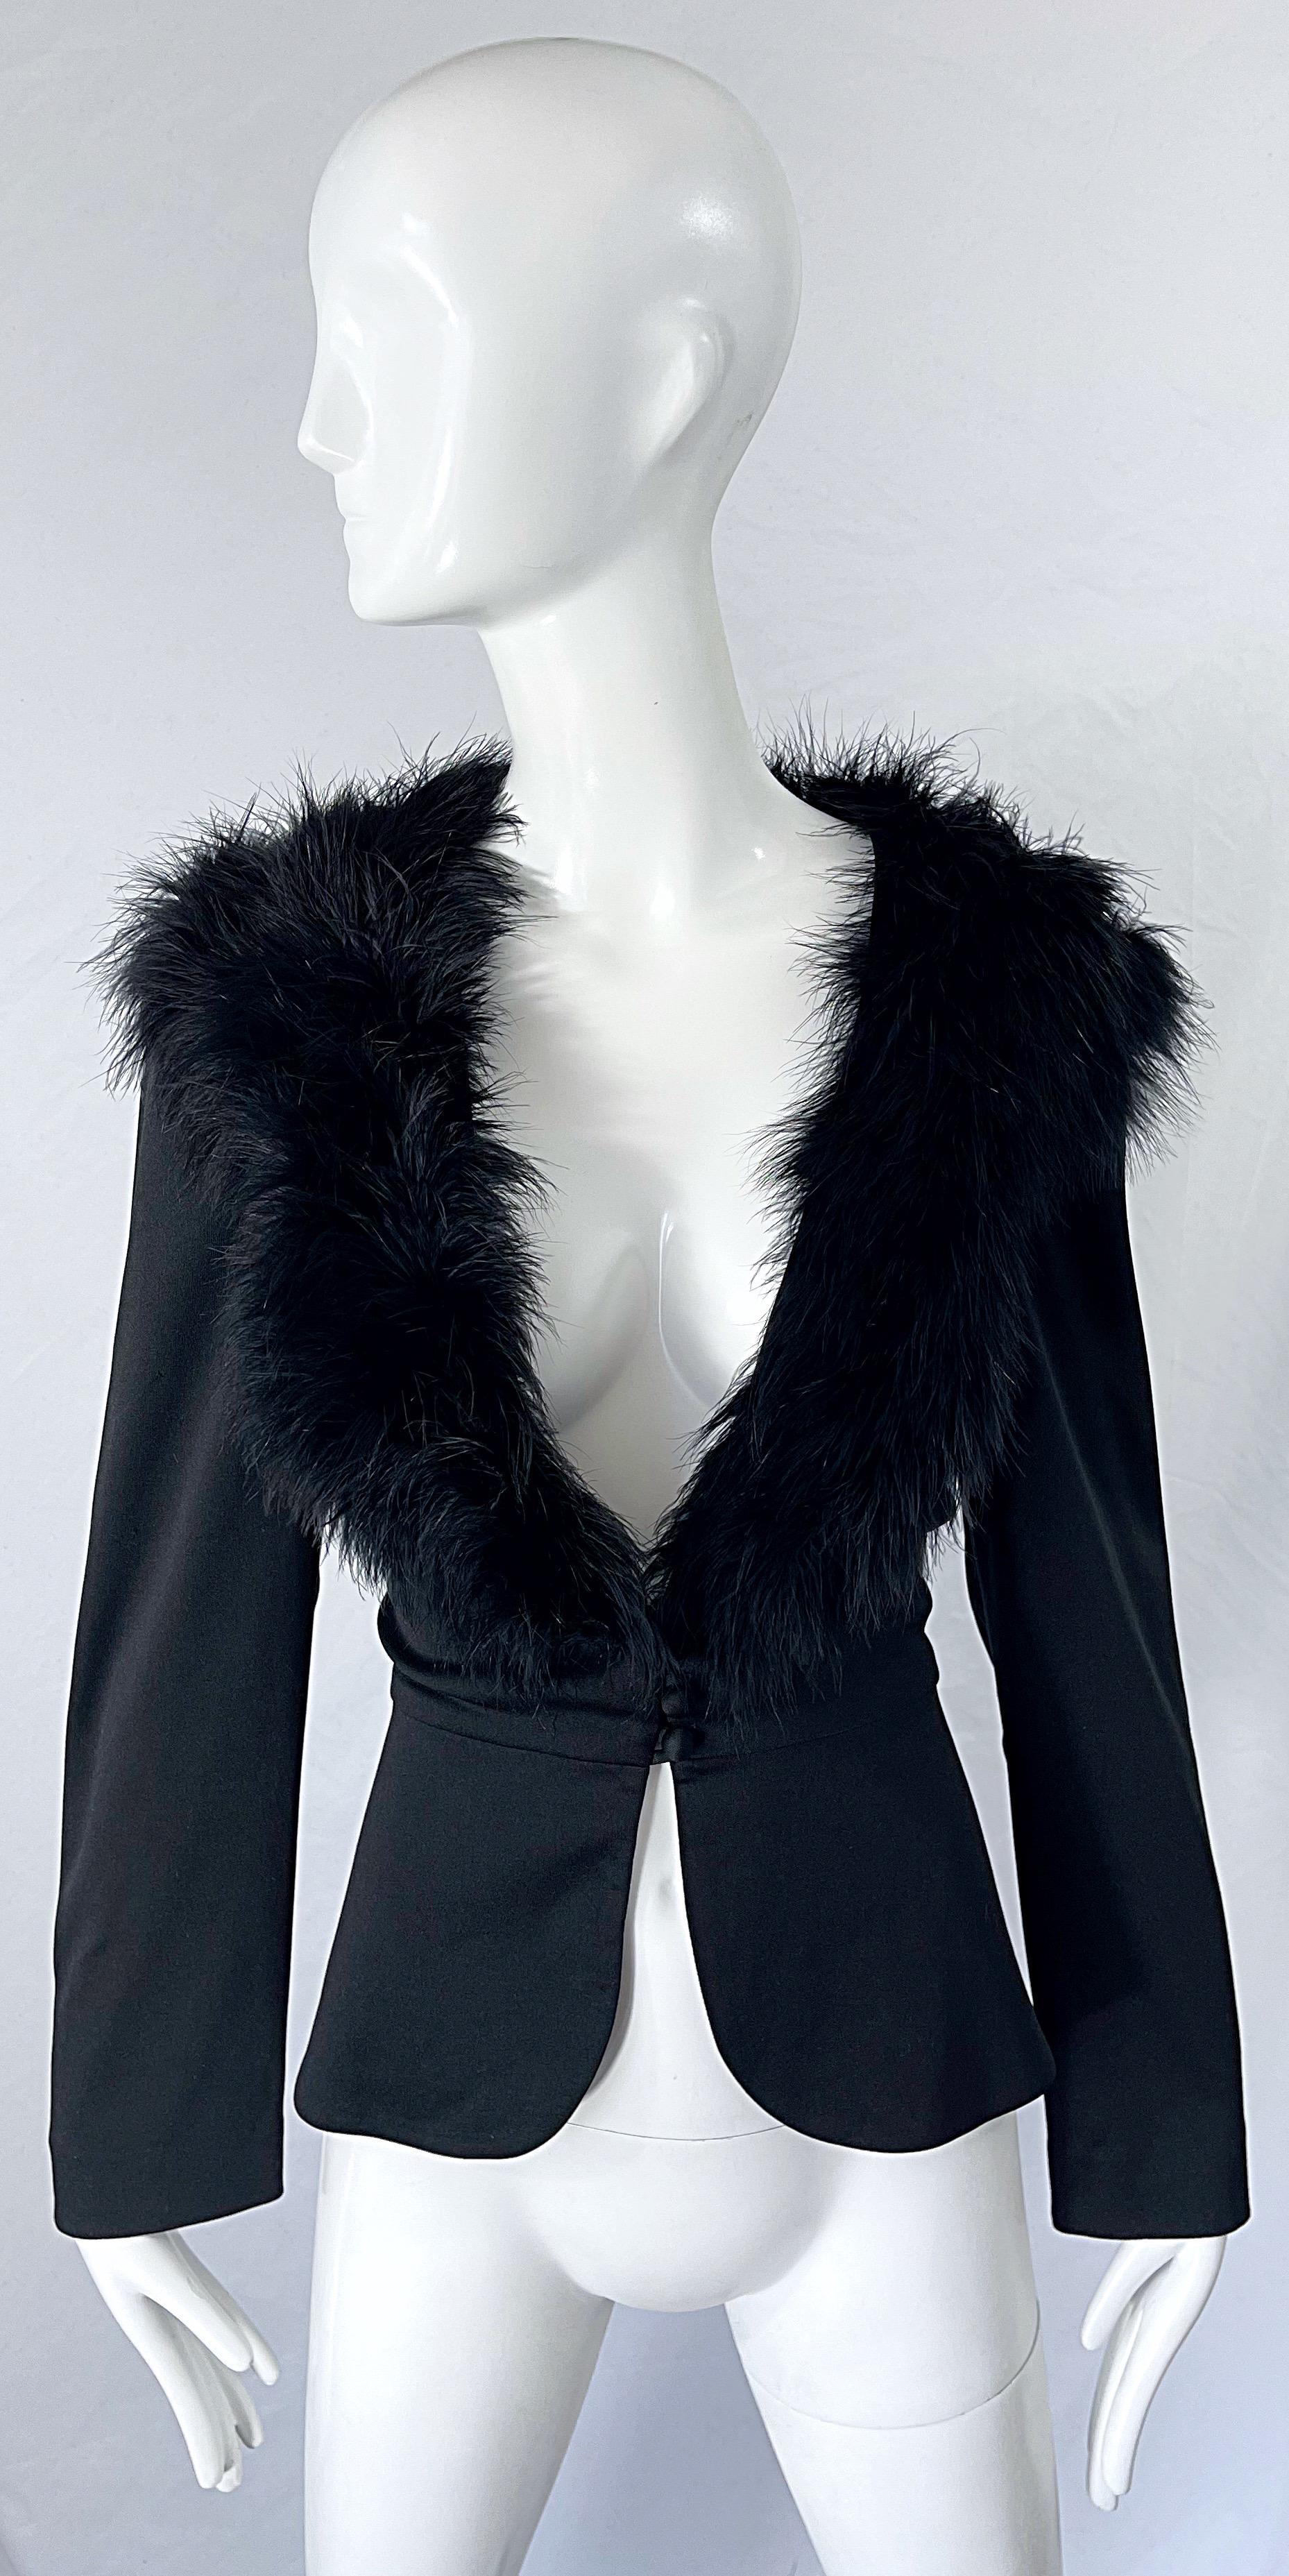 Chic early 70s LILLI DIAMOND black jersey marabou feather encrusted long sleeve cardigan top ! Features a tailored fit with buttons up the front center. Can easily be dressed up or down. Great with jeans, a skirt, shorts or over a dress.
In great